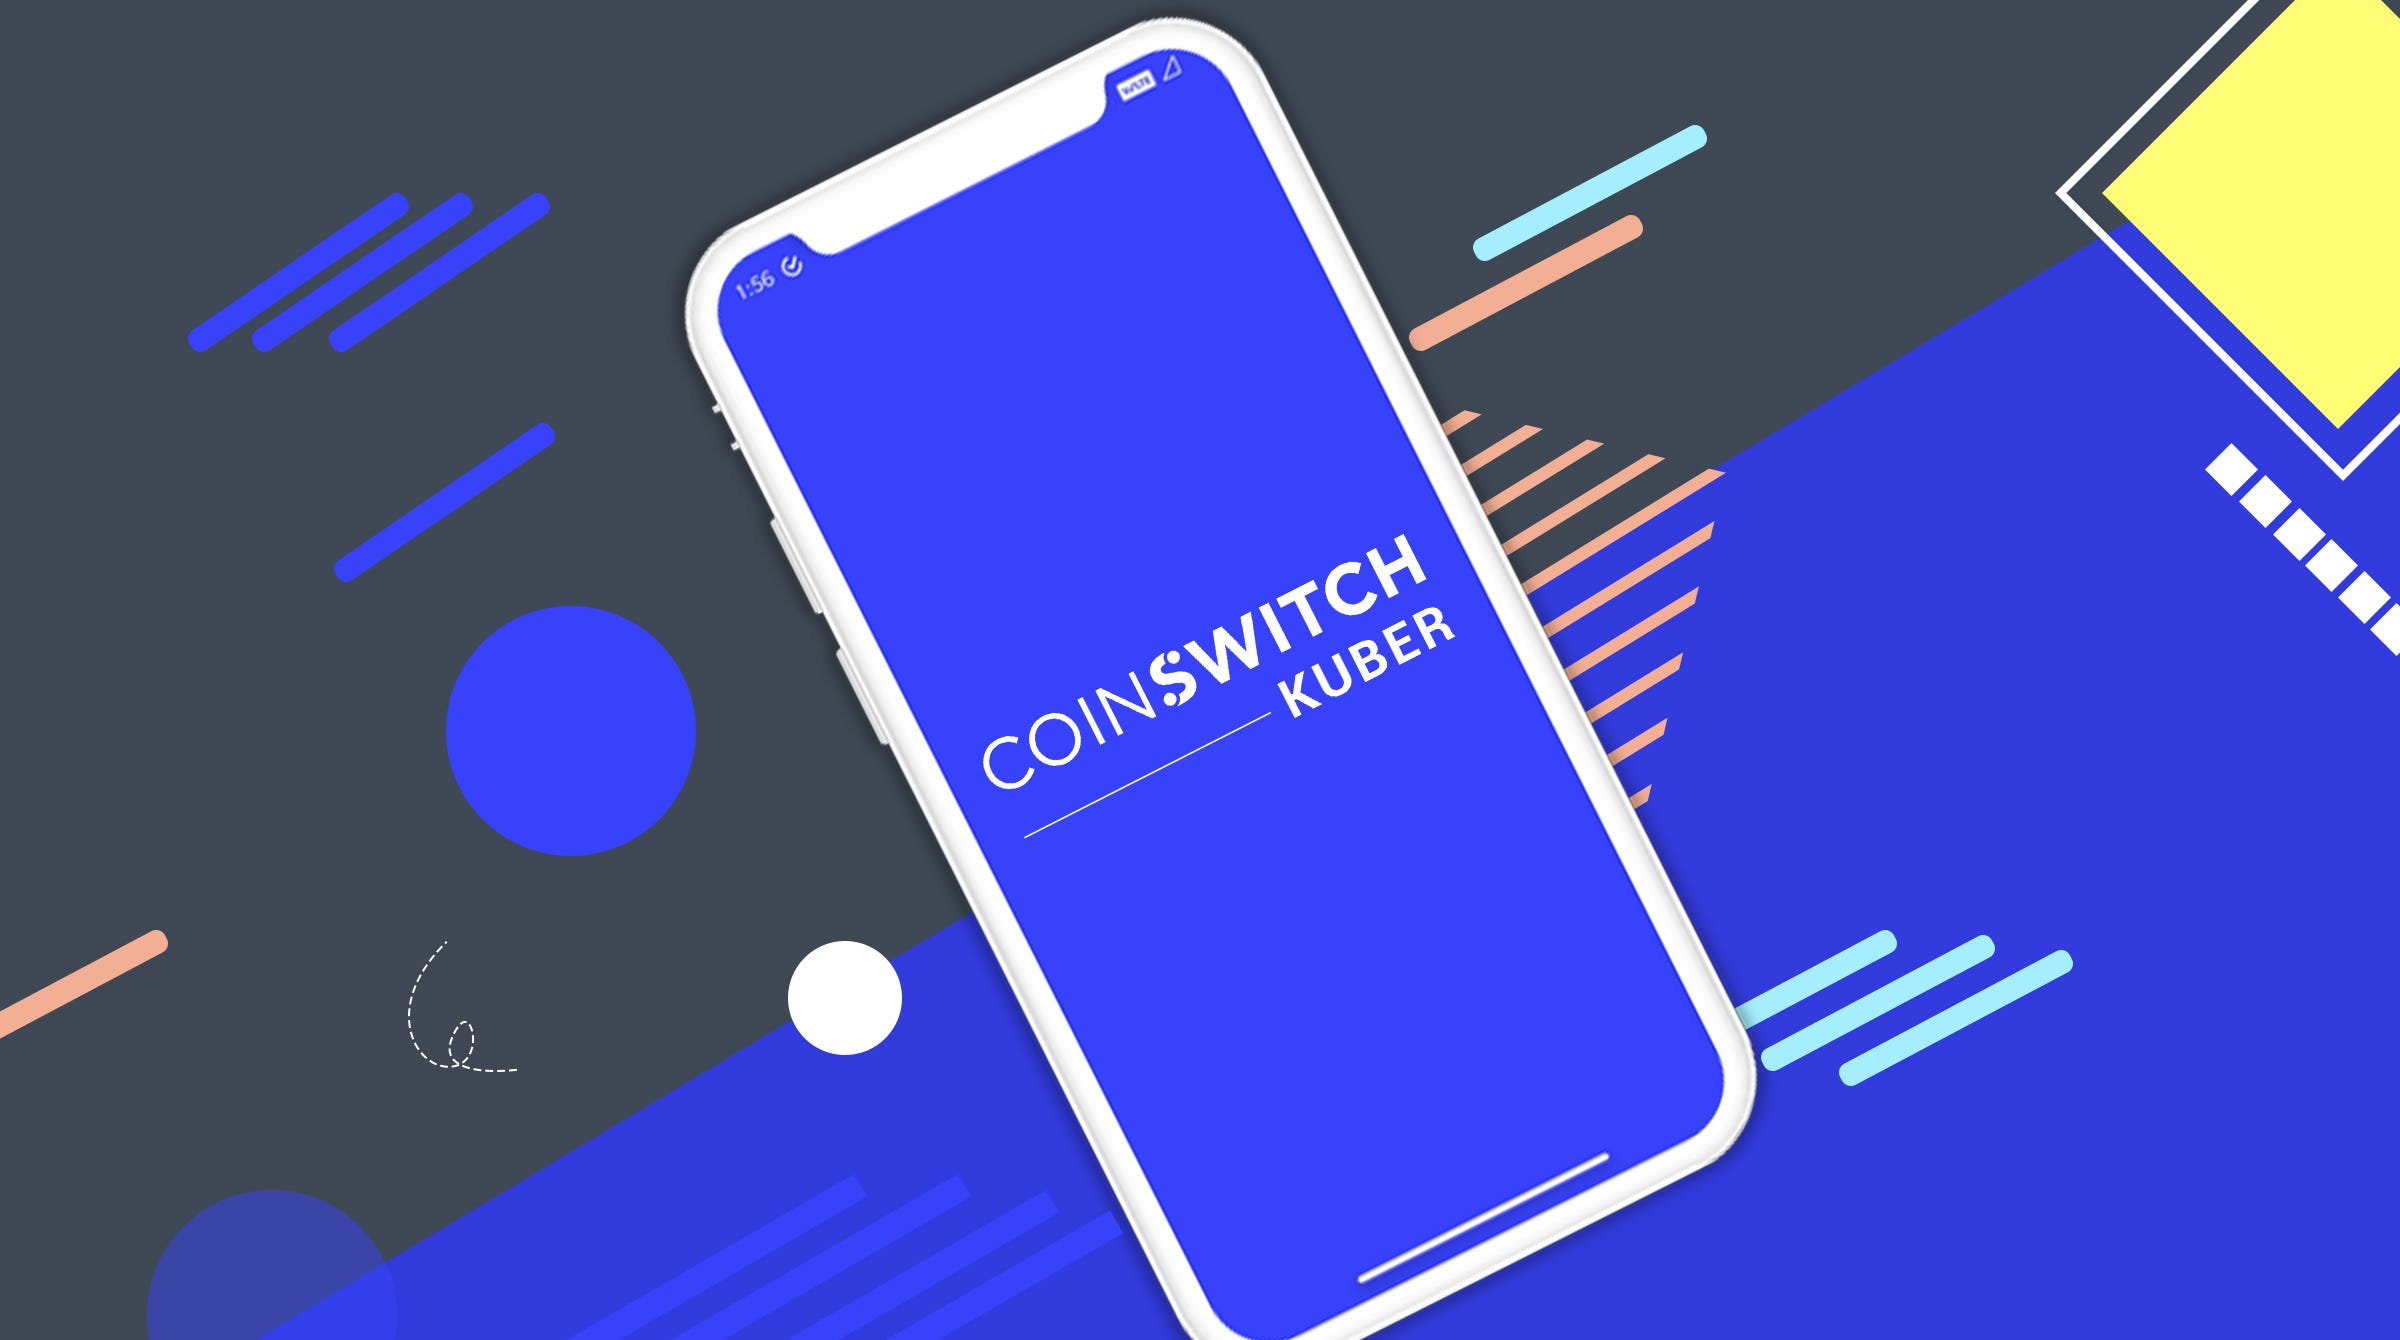 CoinSwitch Kuber is Officially LIVE! | by CoinSwitch ...